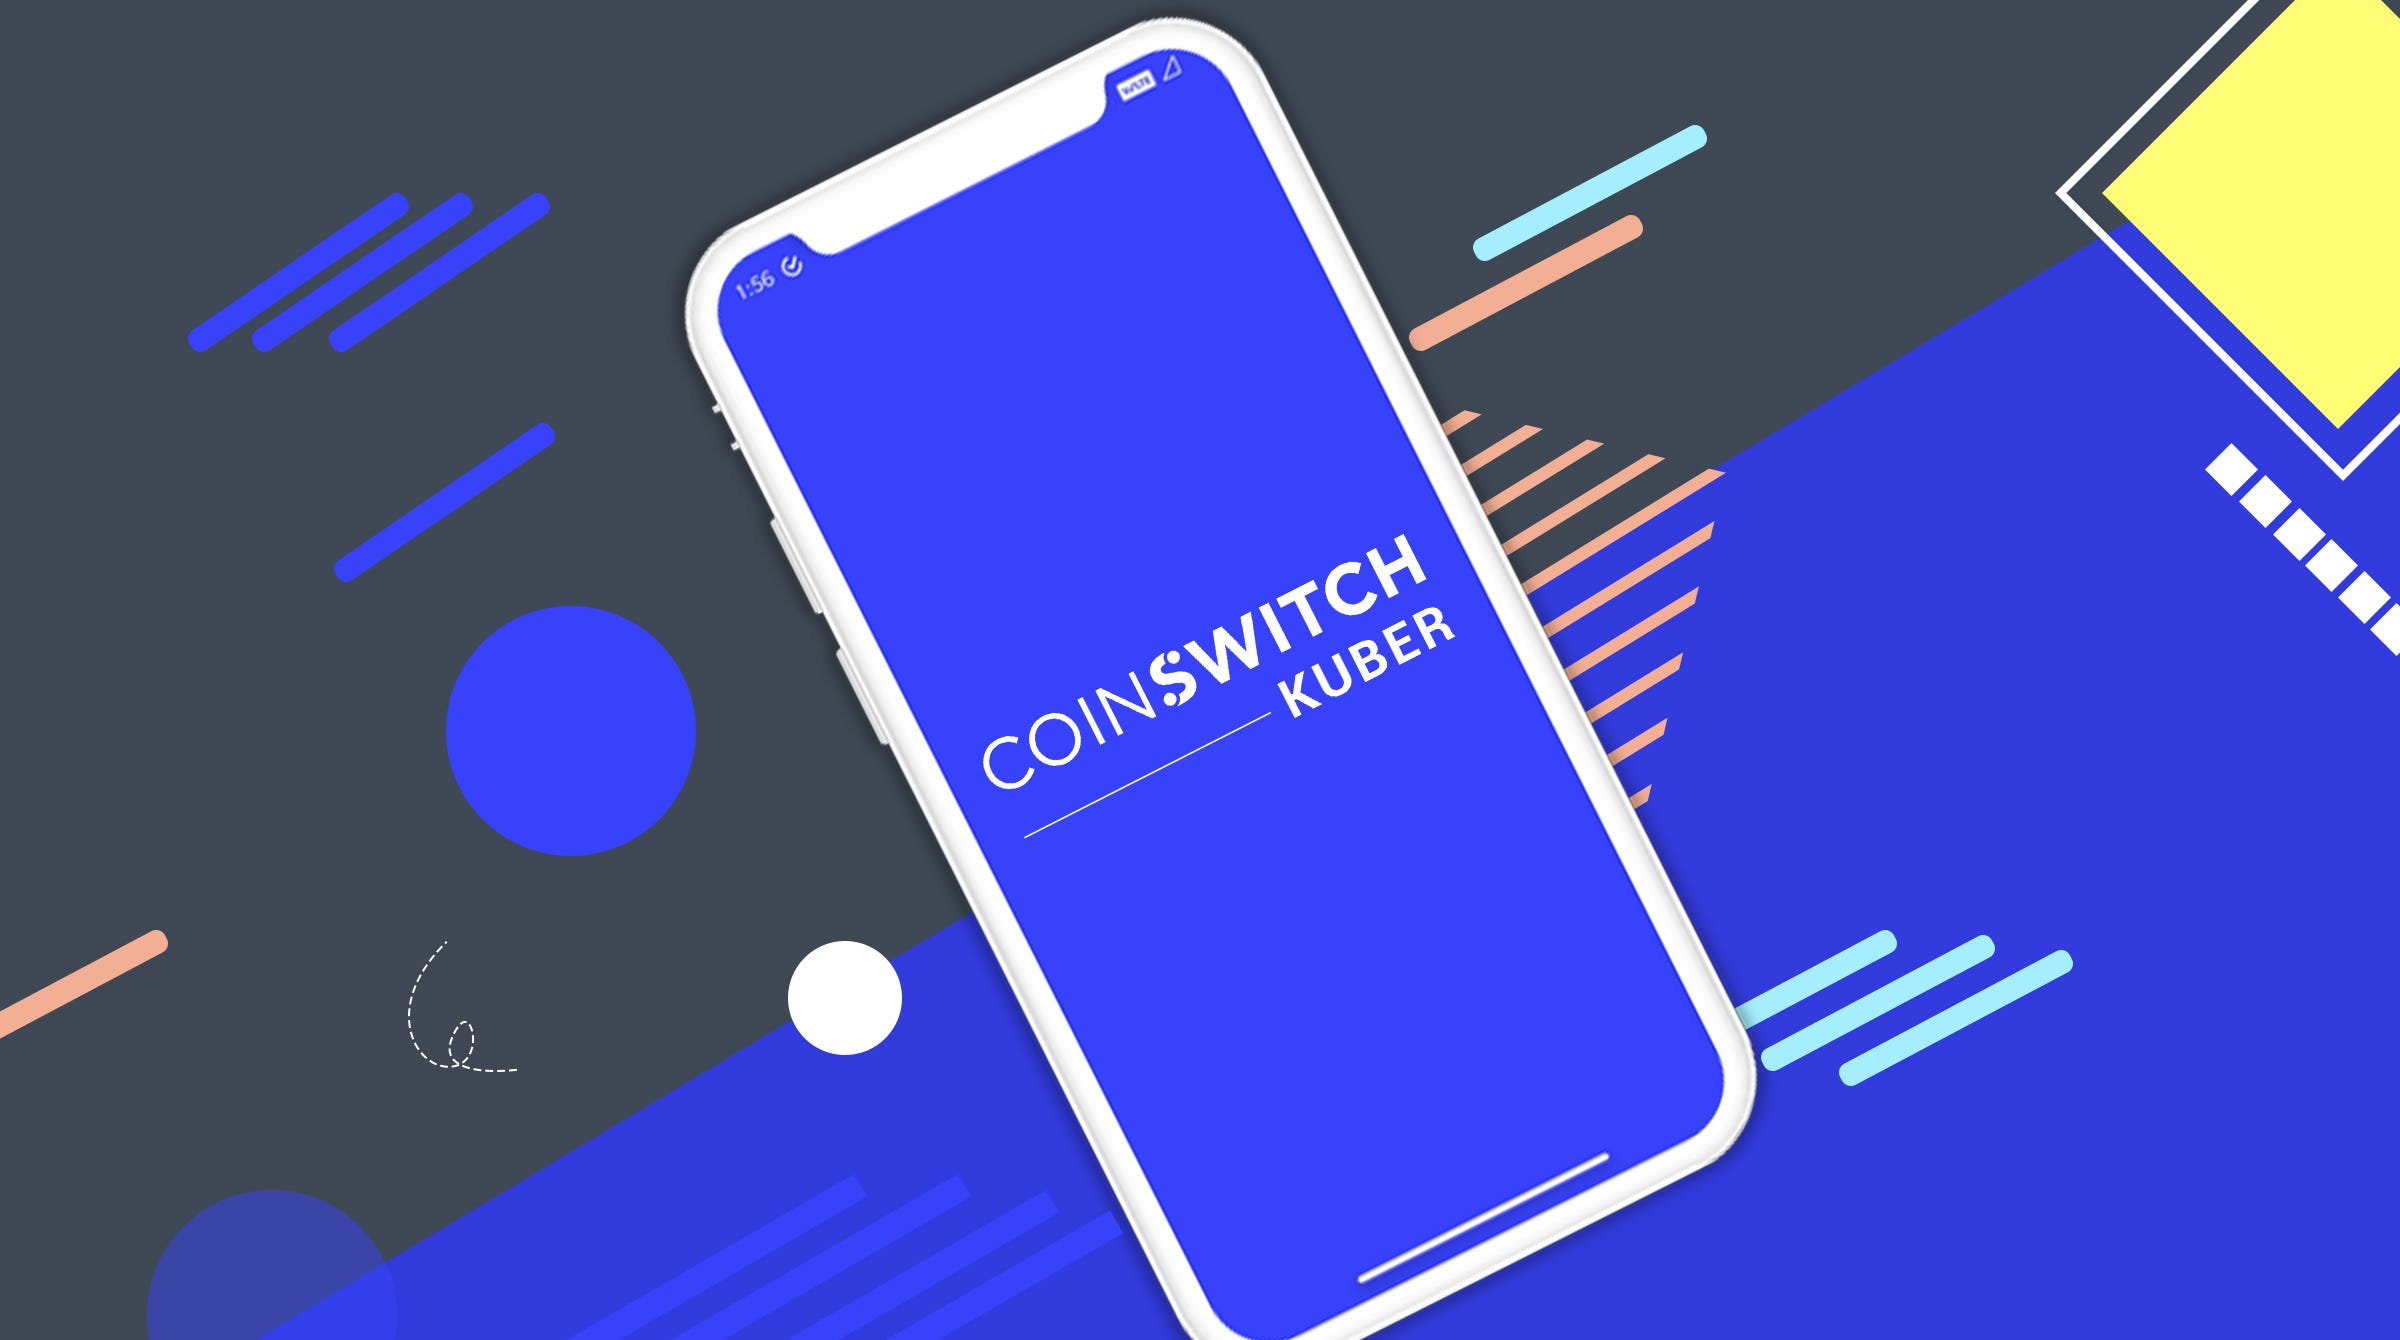 CoinSwitch Kuber is Officially LIVE! | by CoinSwitch ...